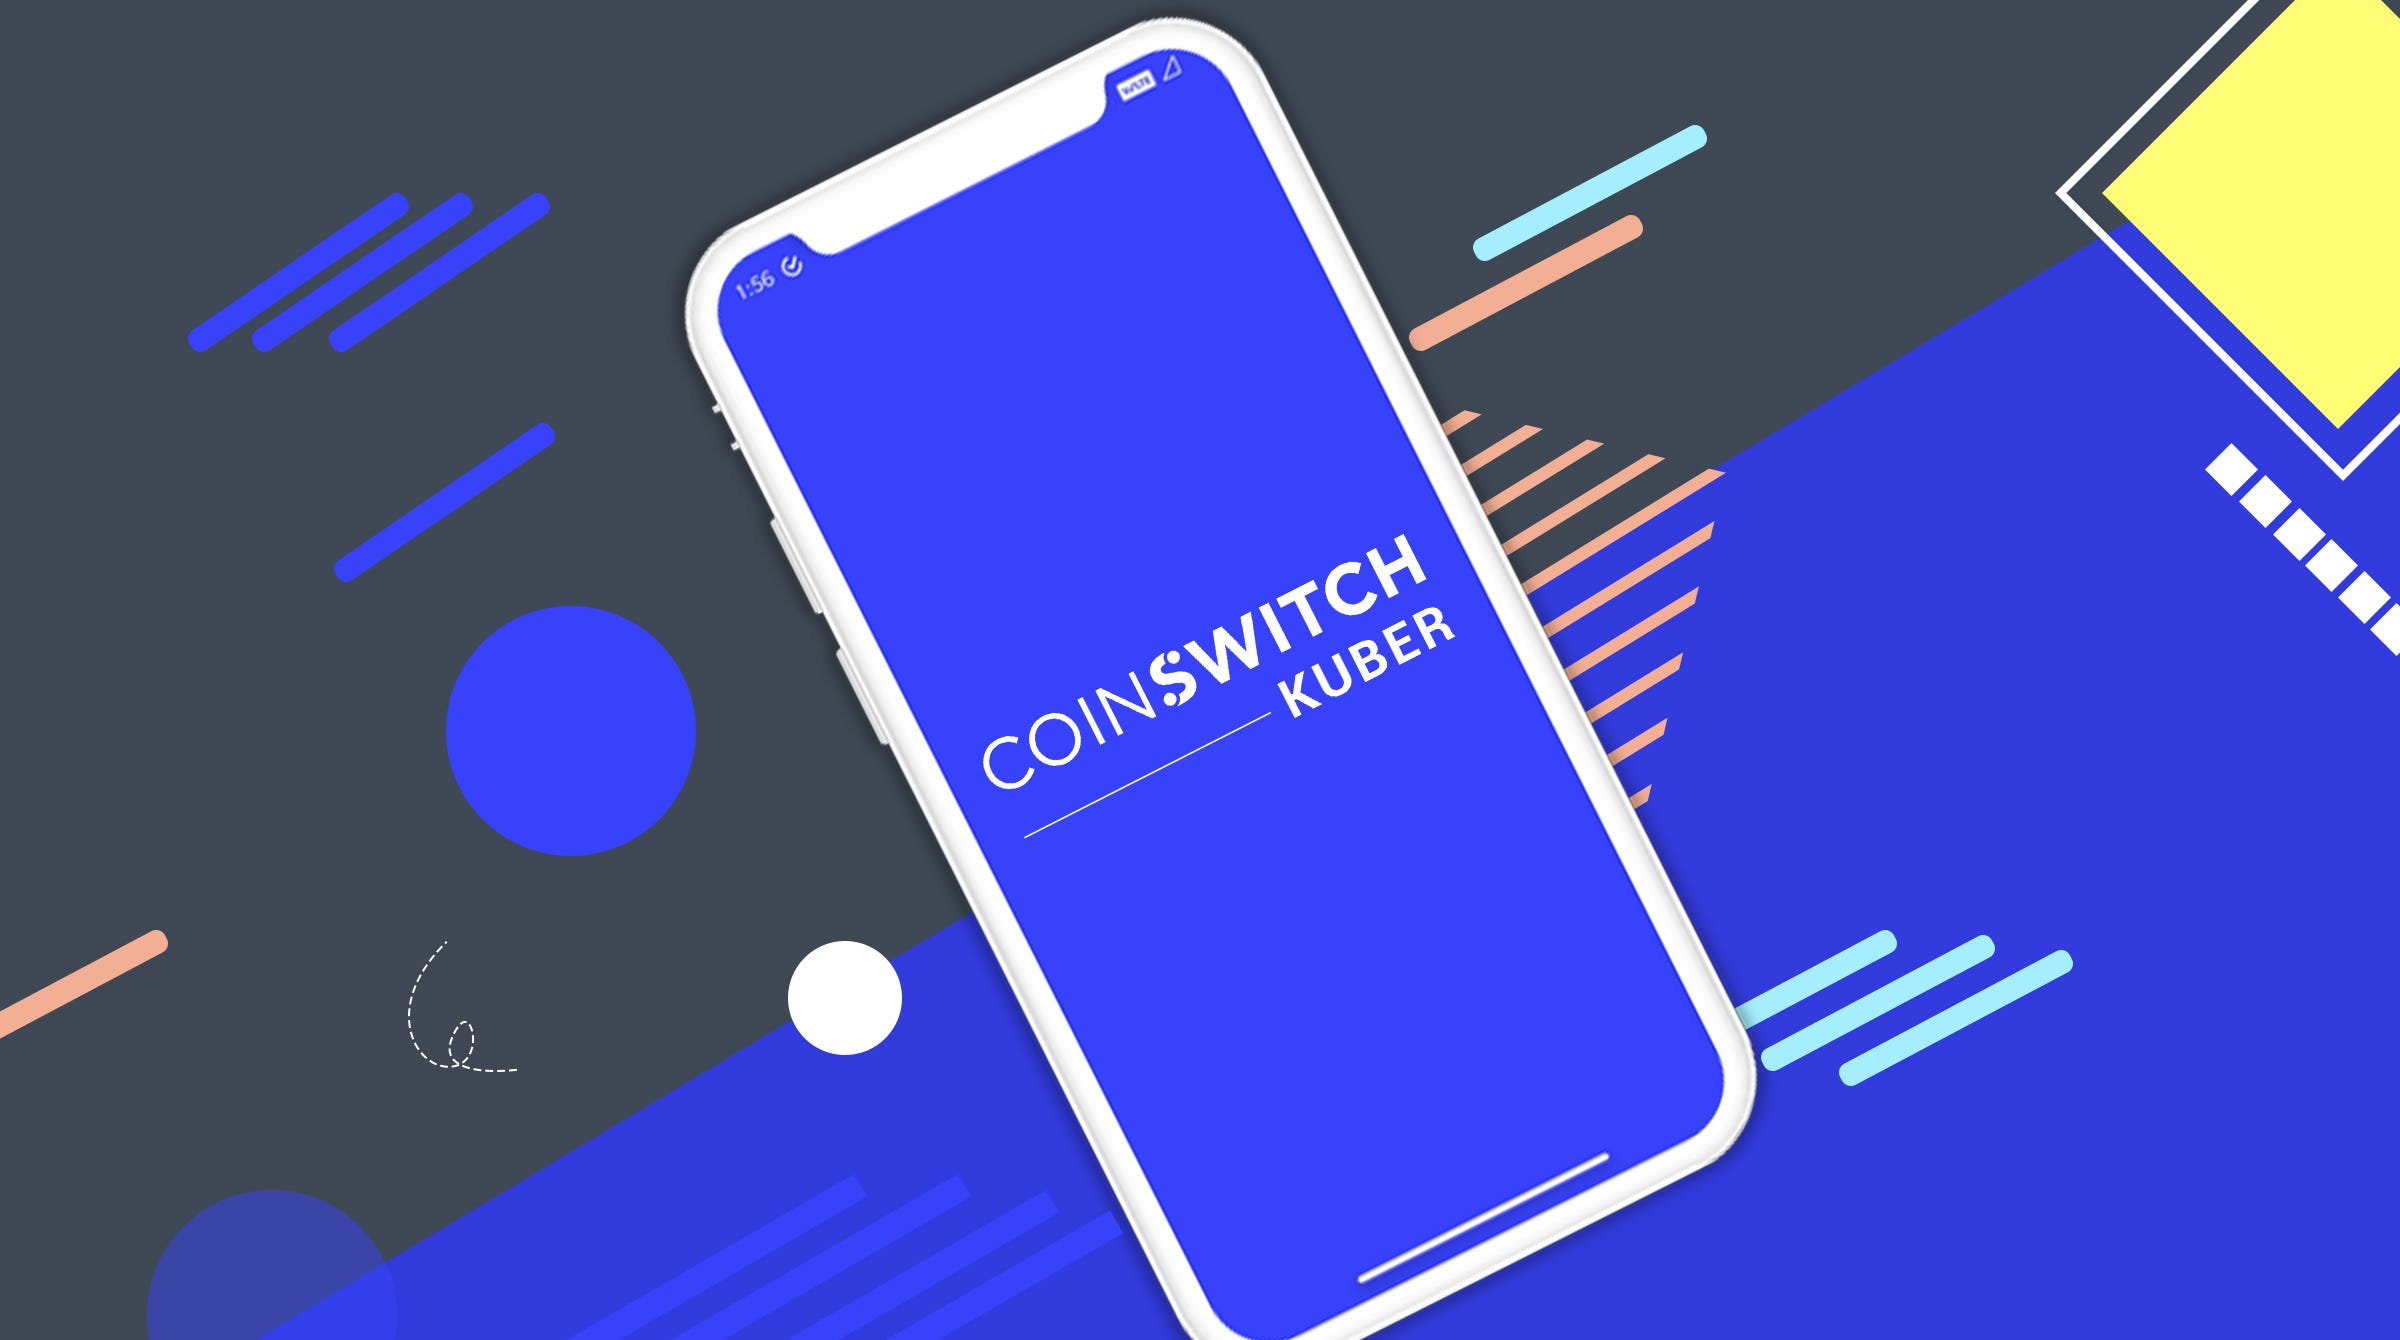 CoinSwitch Kuber is Officially LIVE! | by CoinSwitch ...